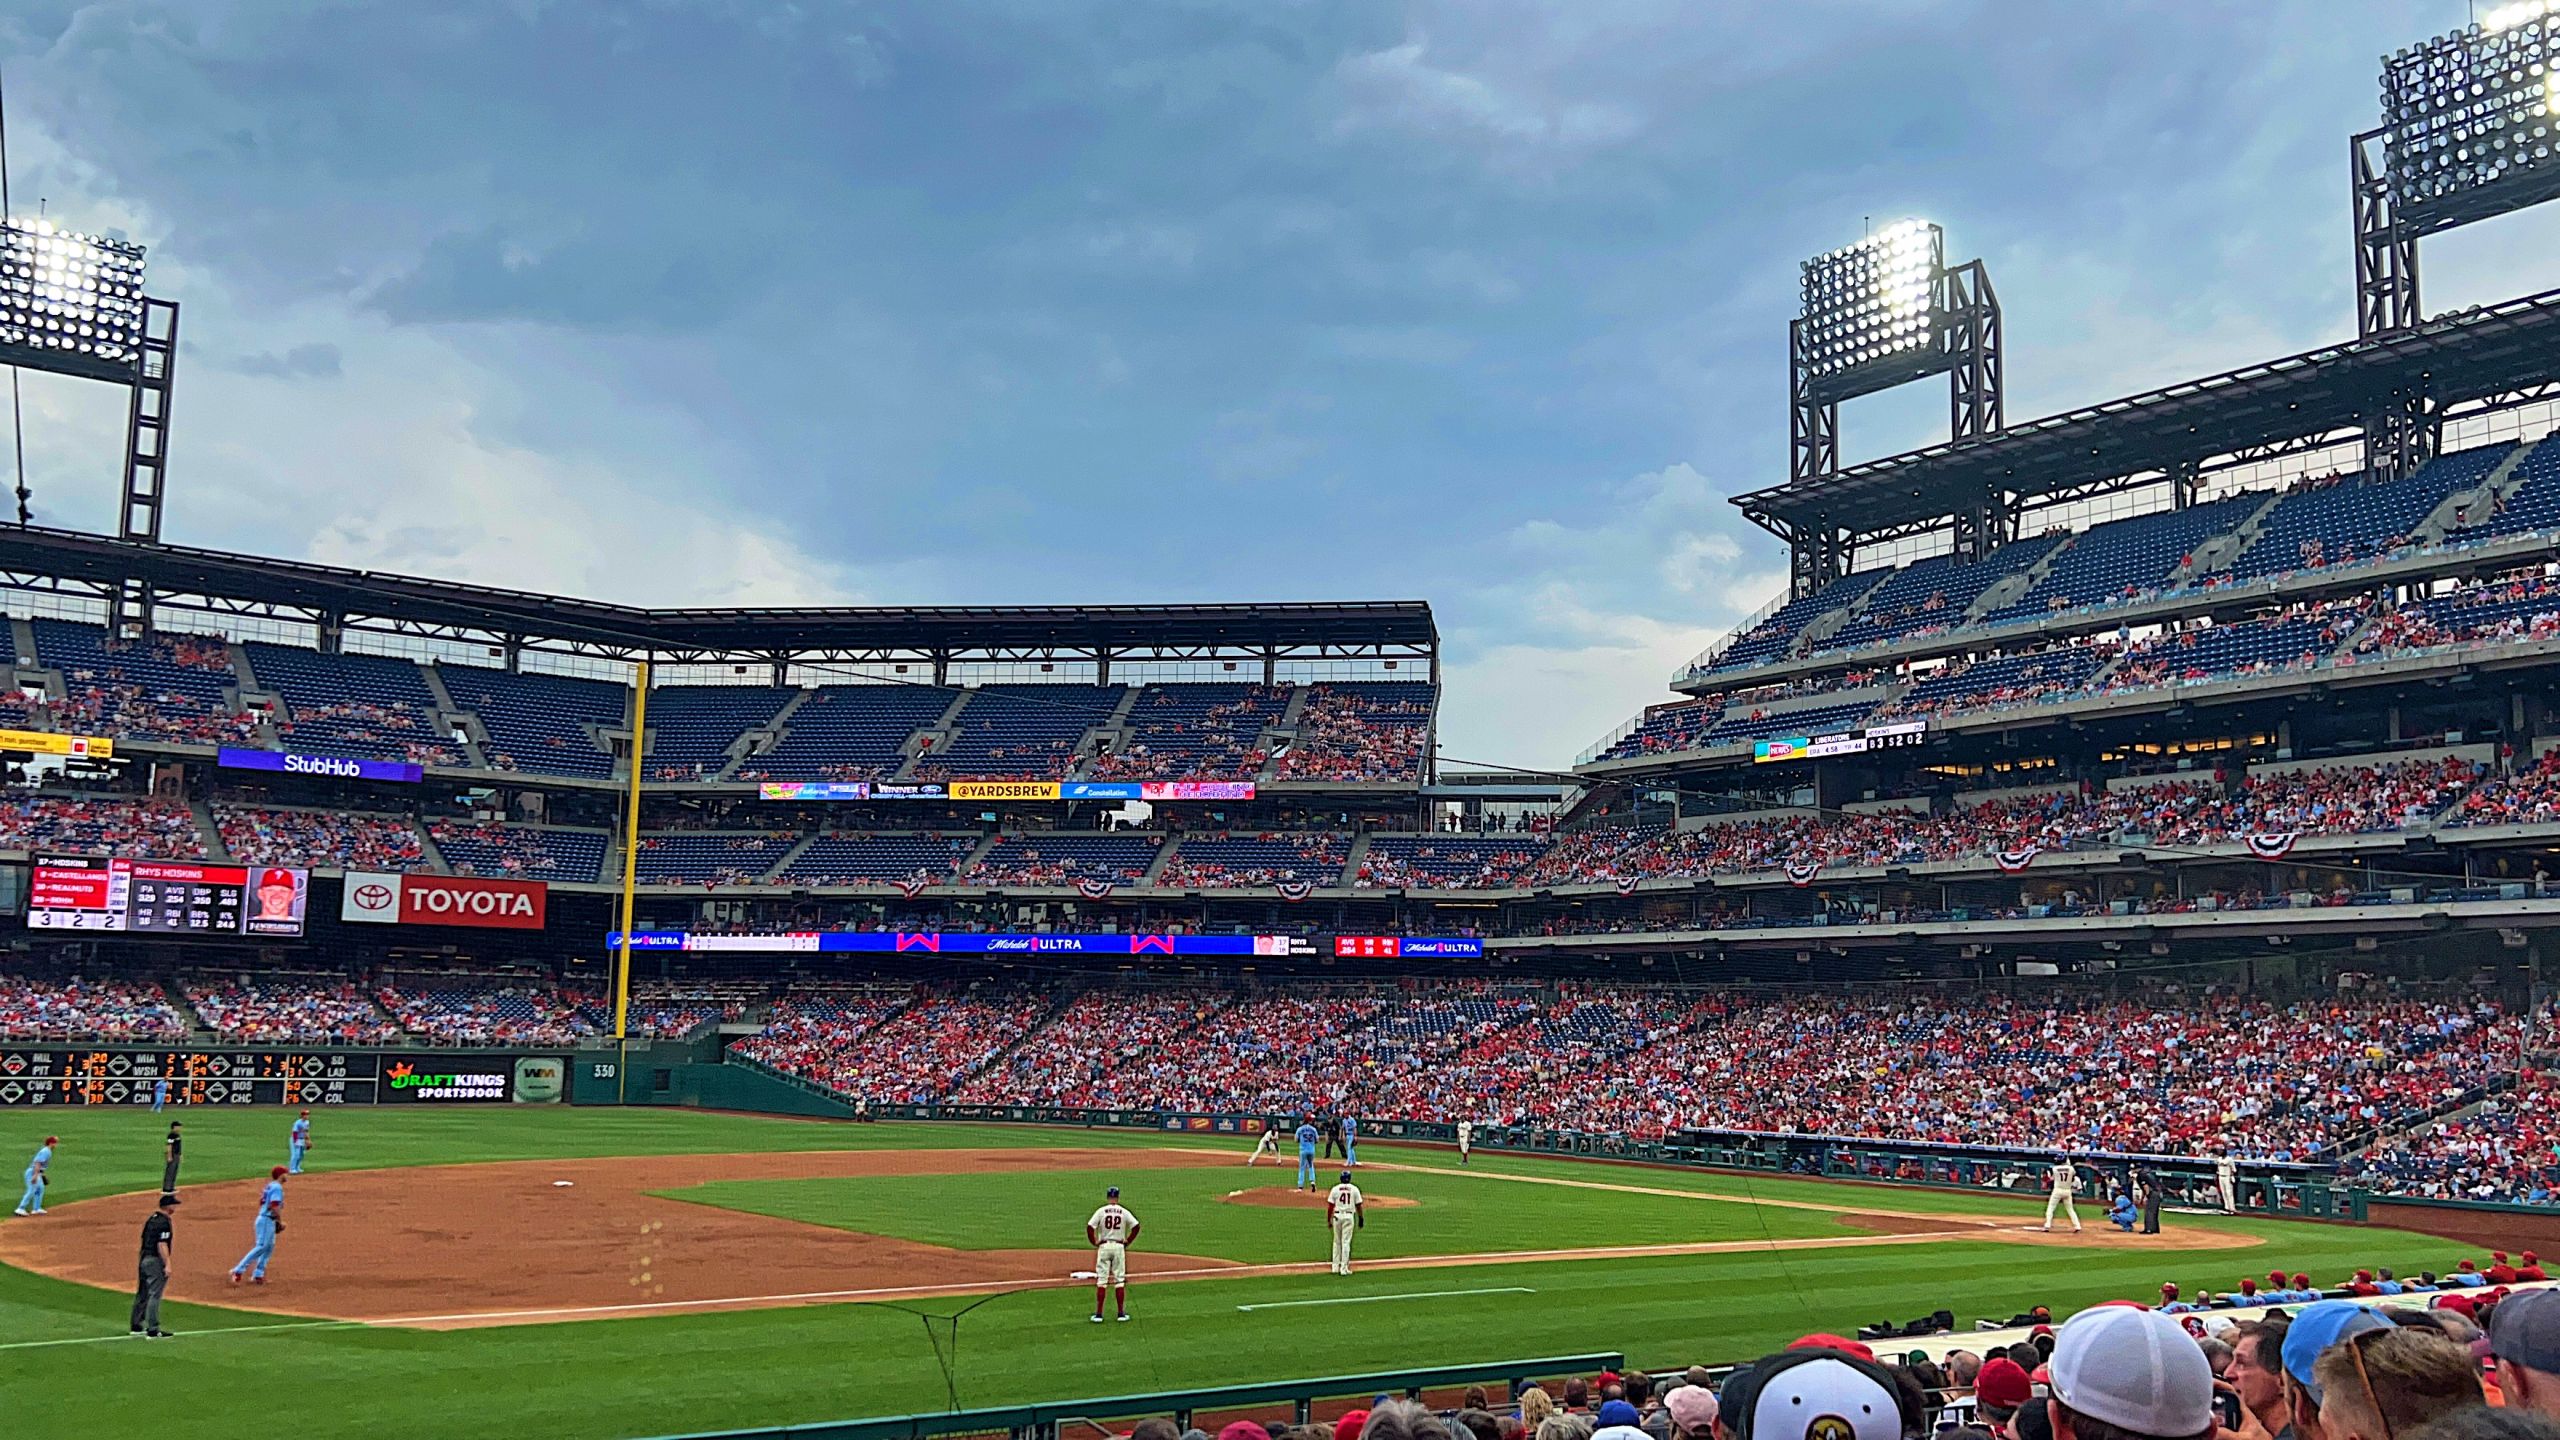 Phillies playing at Citizens Bank Park. Photo by Madison Gugel.